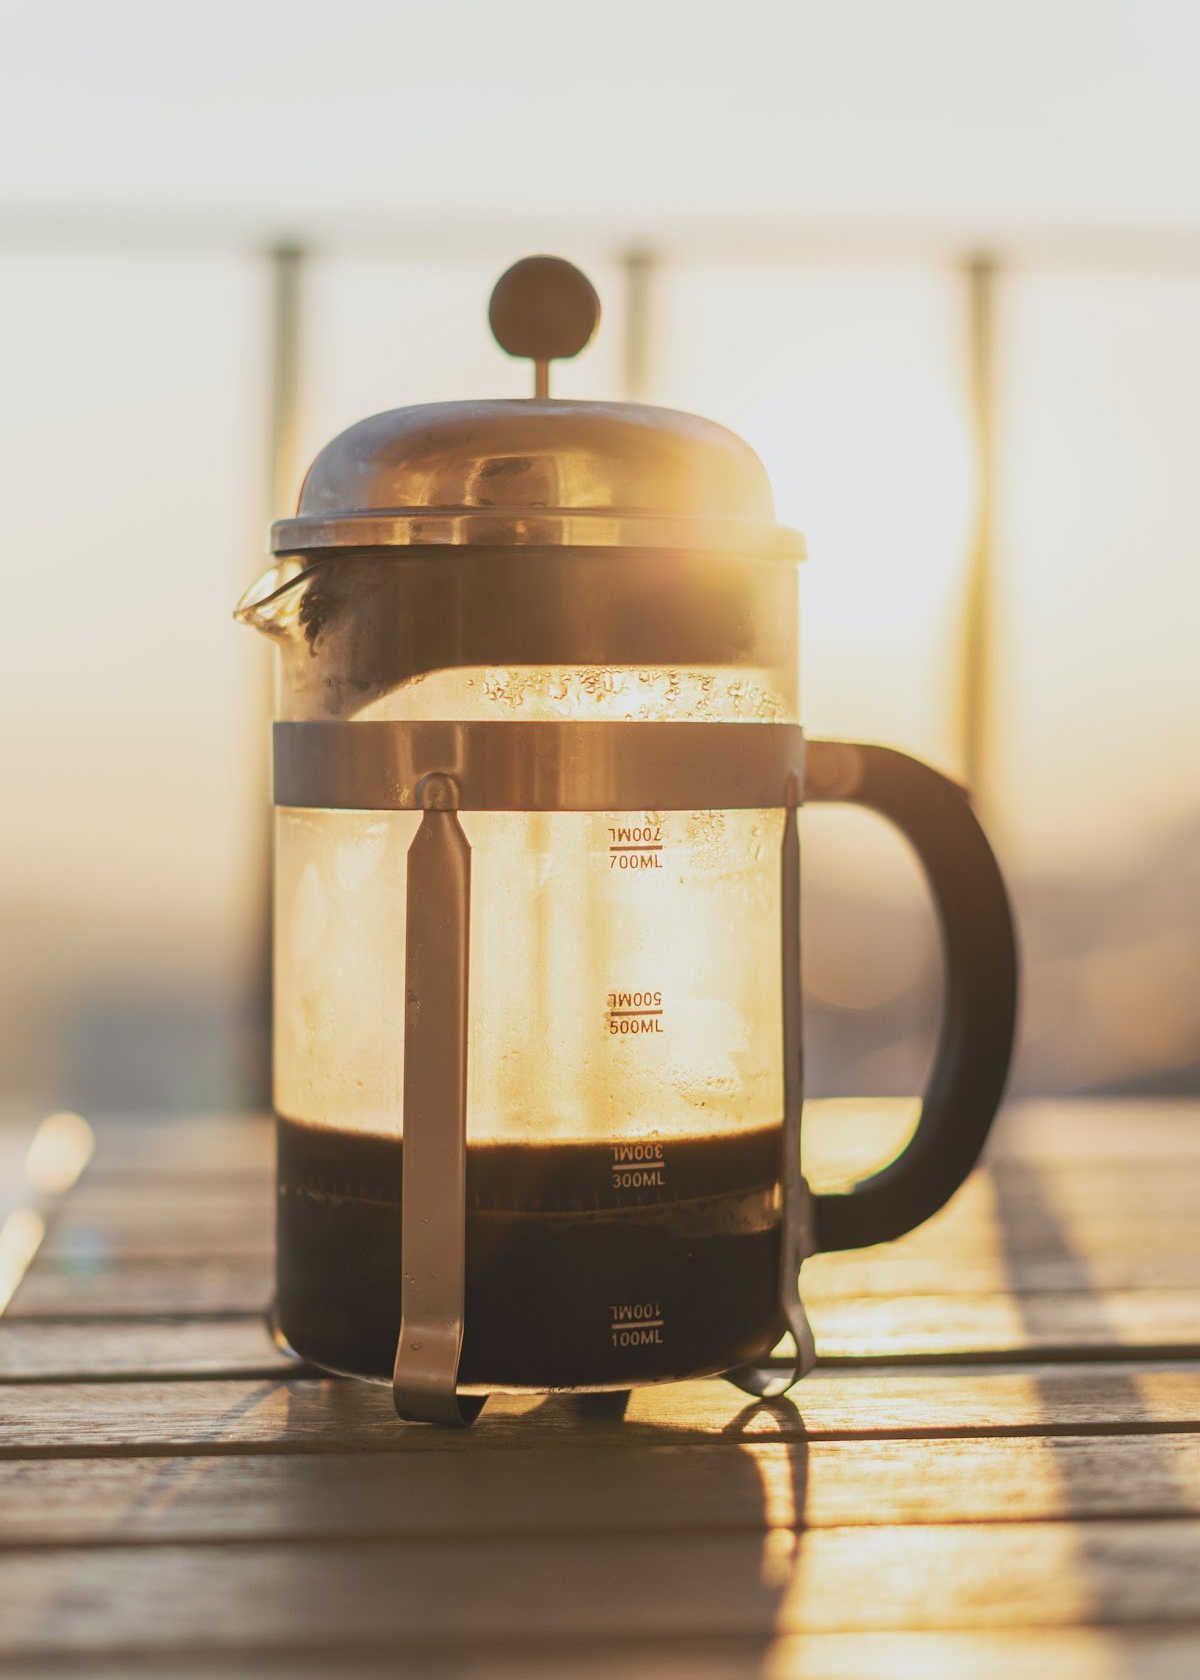 The Best Manual Coffee Maker: A Fine Art Of Brewing At Your Home